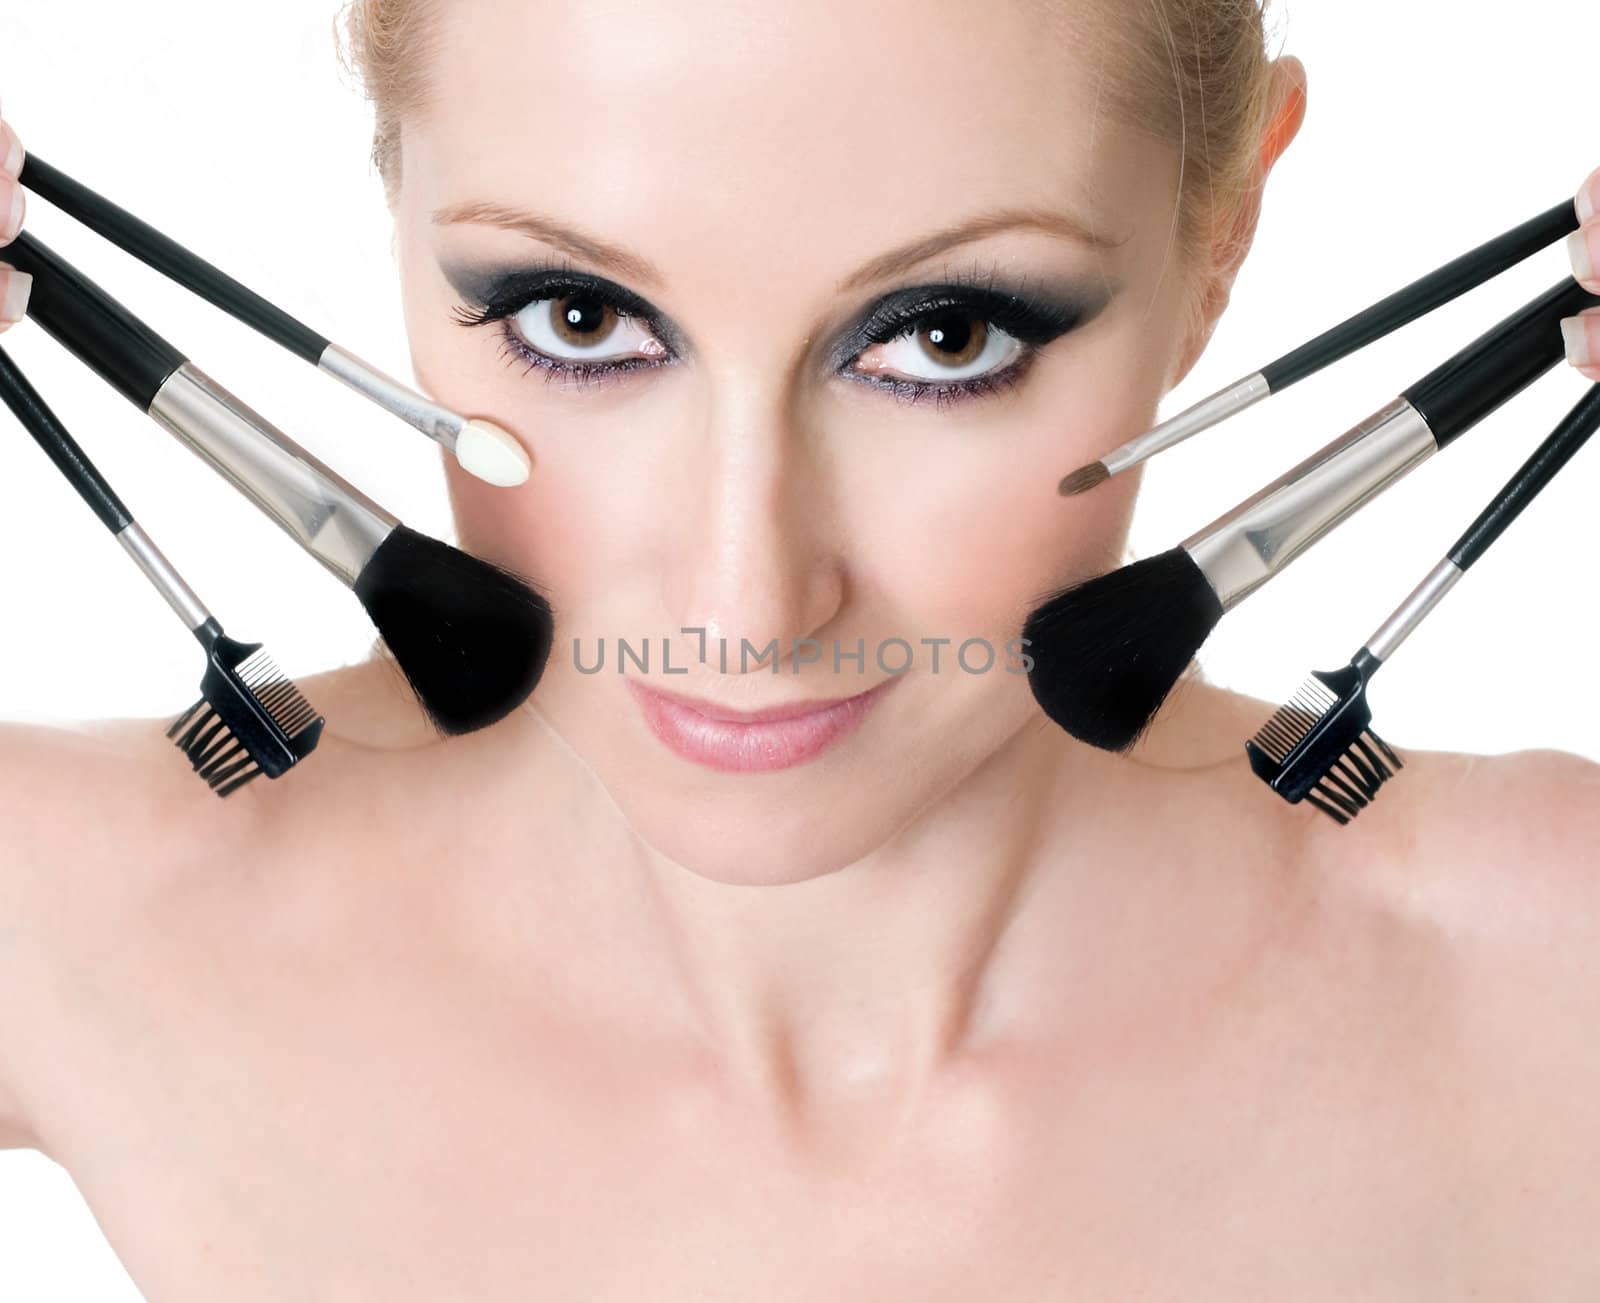 Makeup brushes and tools help achieve flawless application of cosmetics.  Brushes and applicators surround a woman's face.